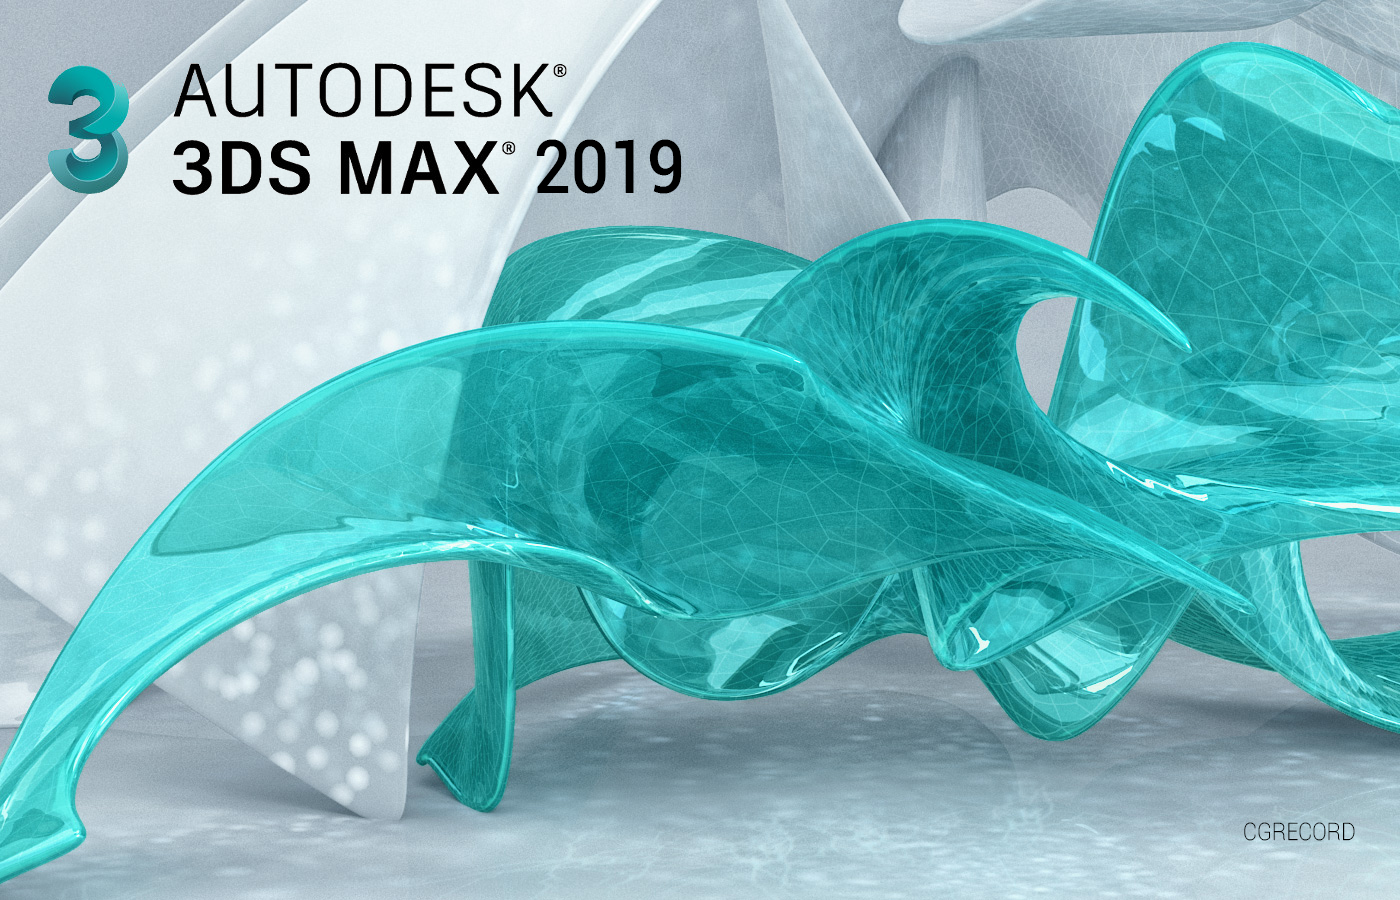 Autodesk 3Ds Max 2019. Computer Graphics Daily News